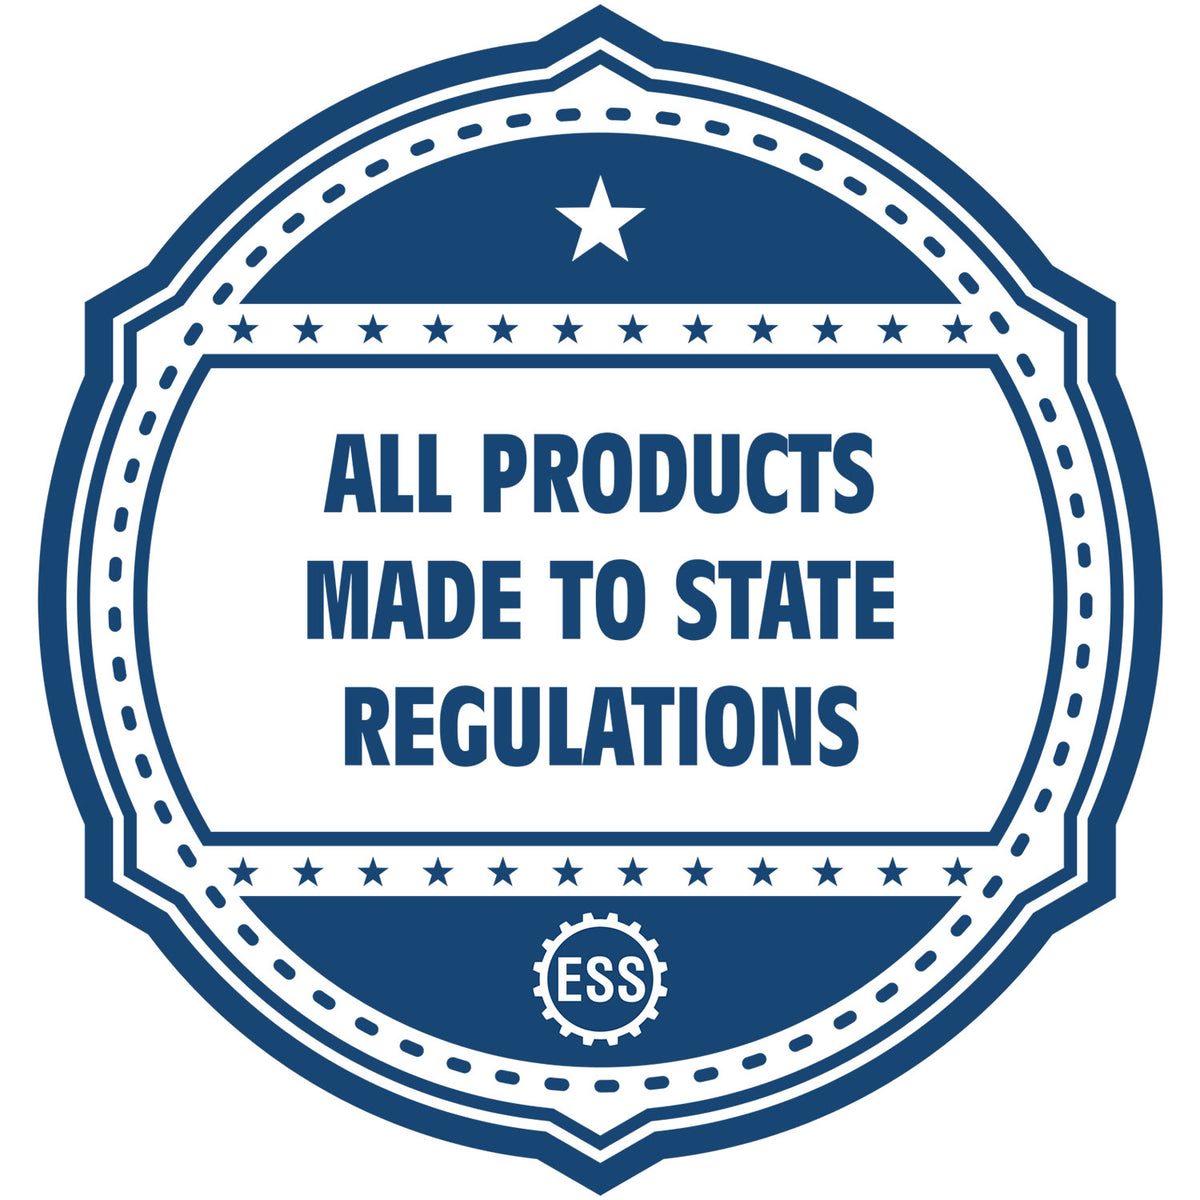 An icon or badge element for the State of Pennsylvania Long Reach Architectural Embossing Seal showing that this product is made in compliance with state regulations.